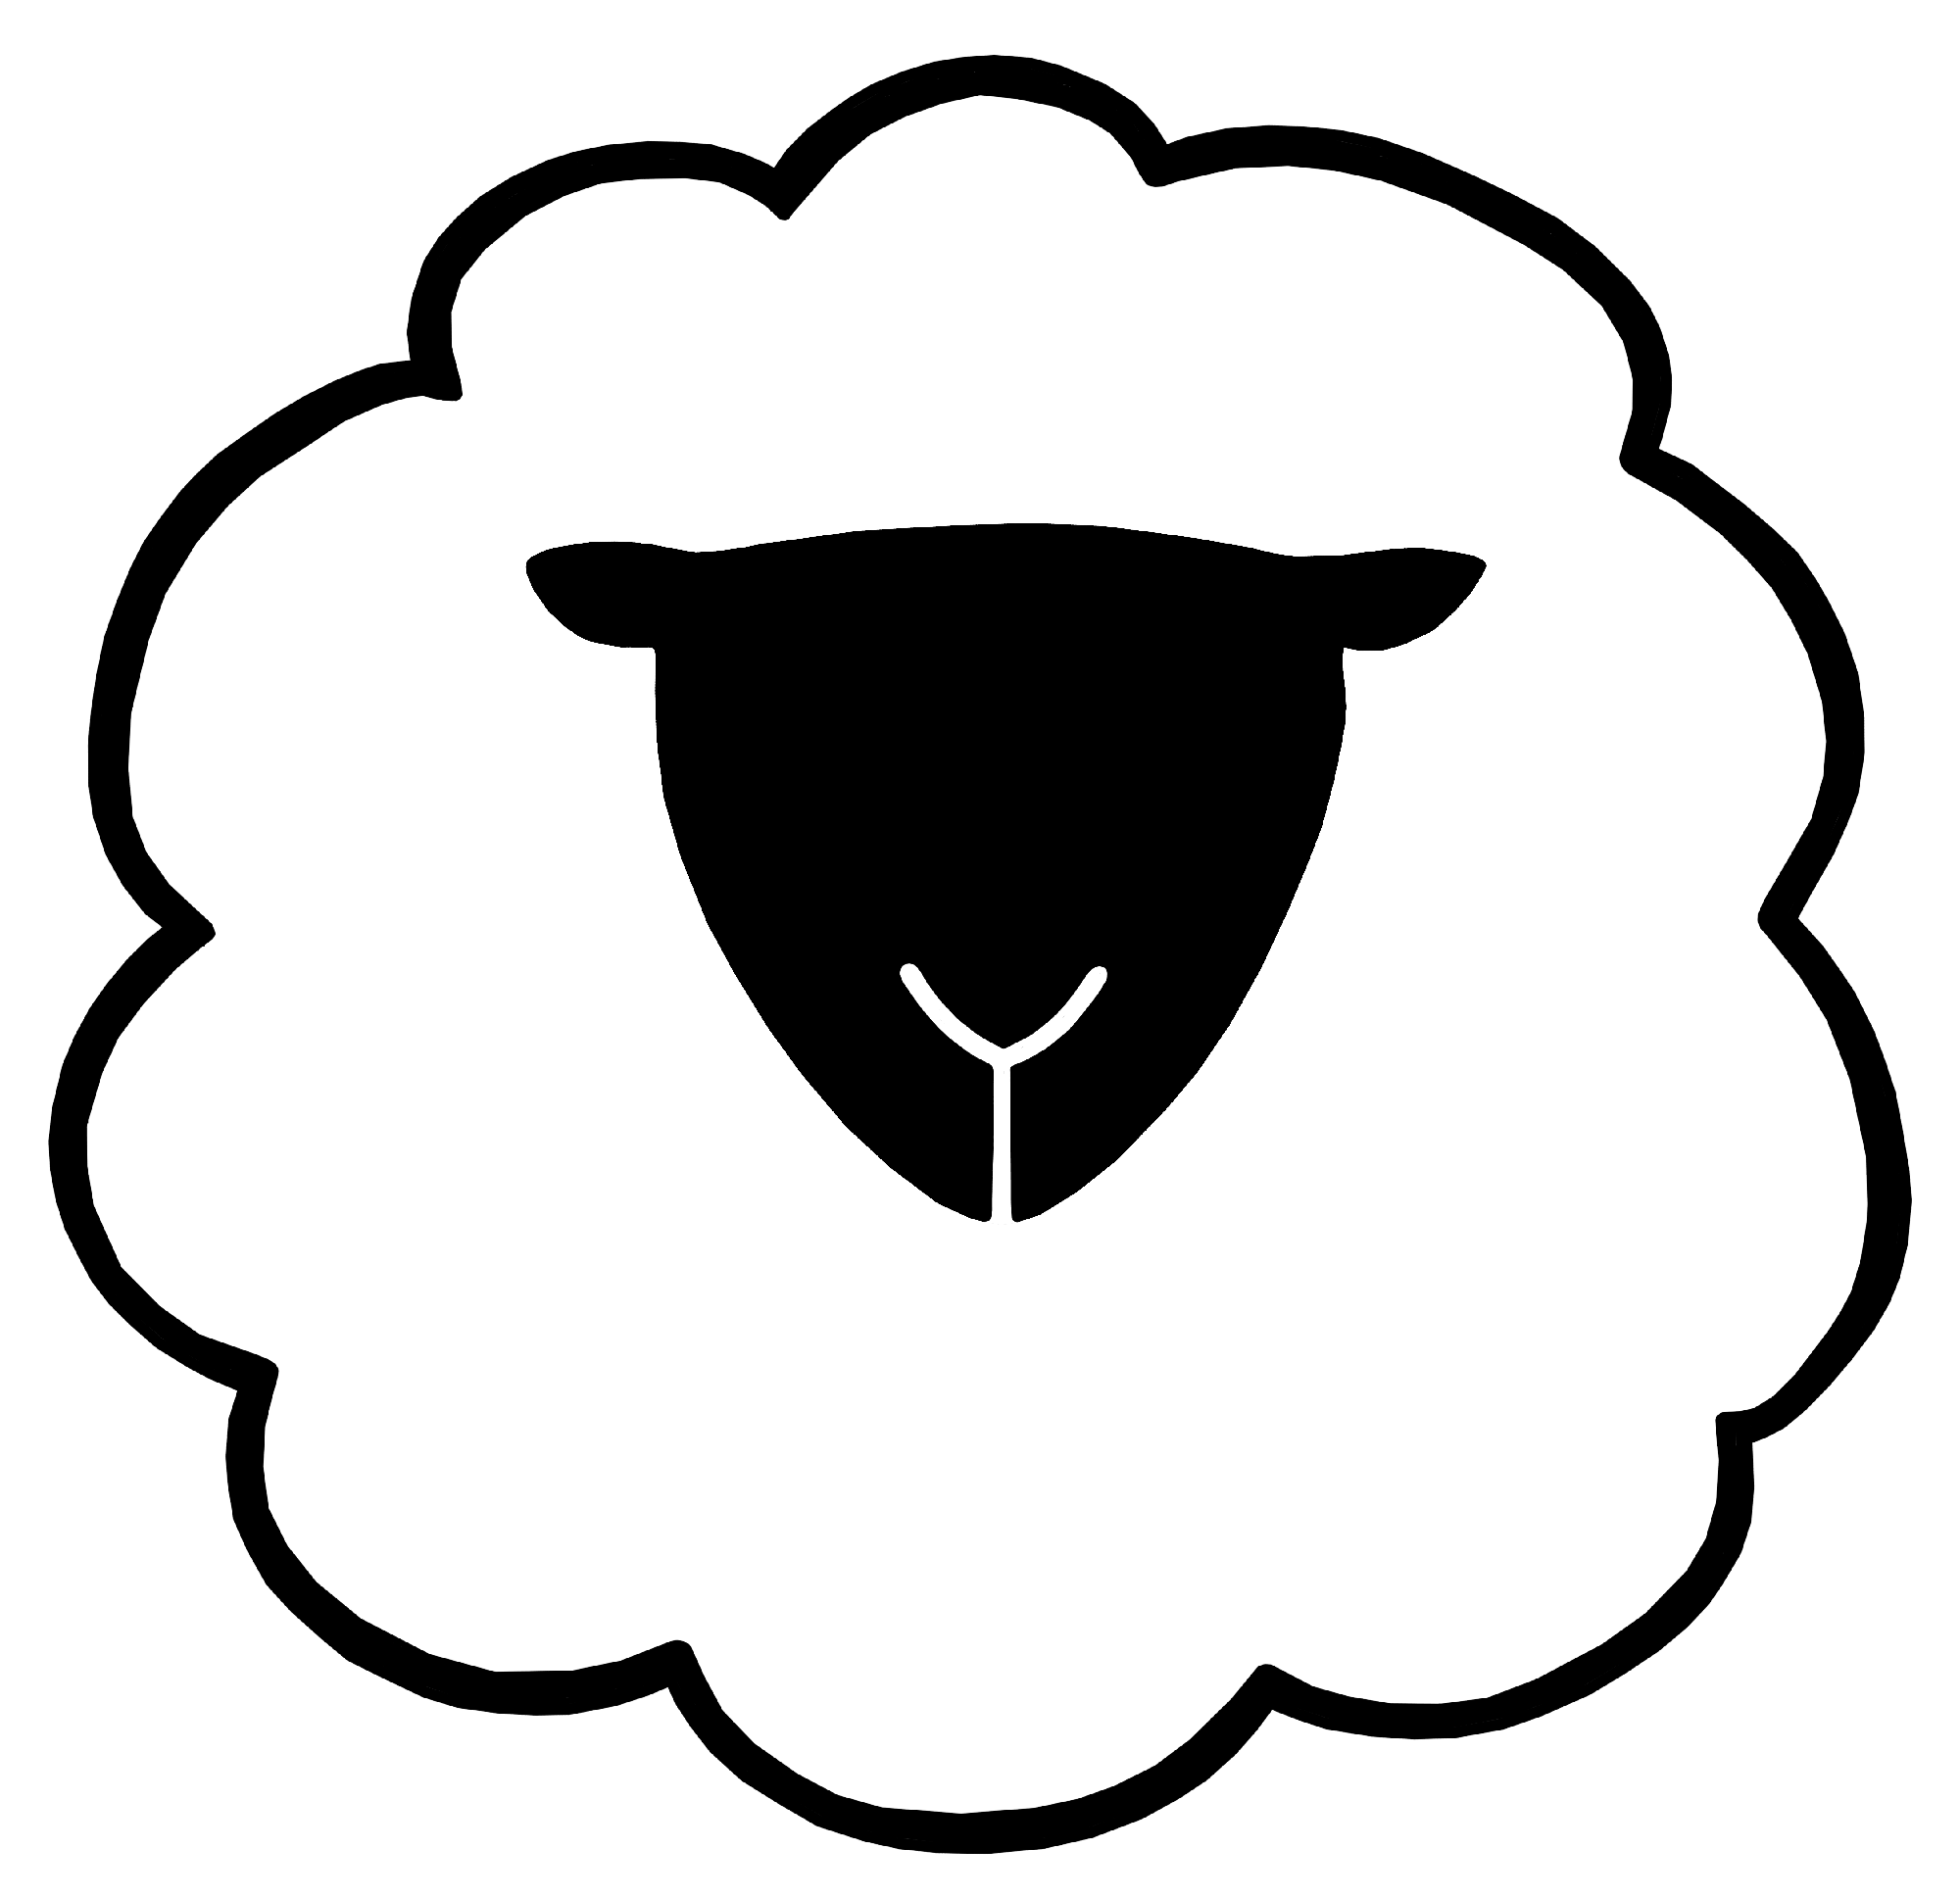 image of a white sheep with a white head